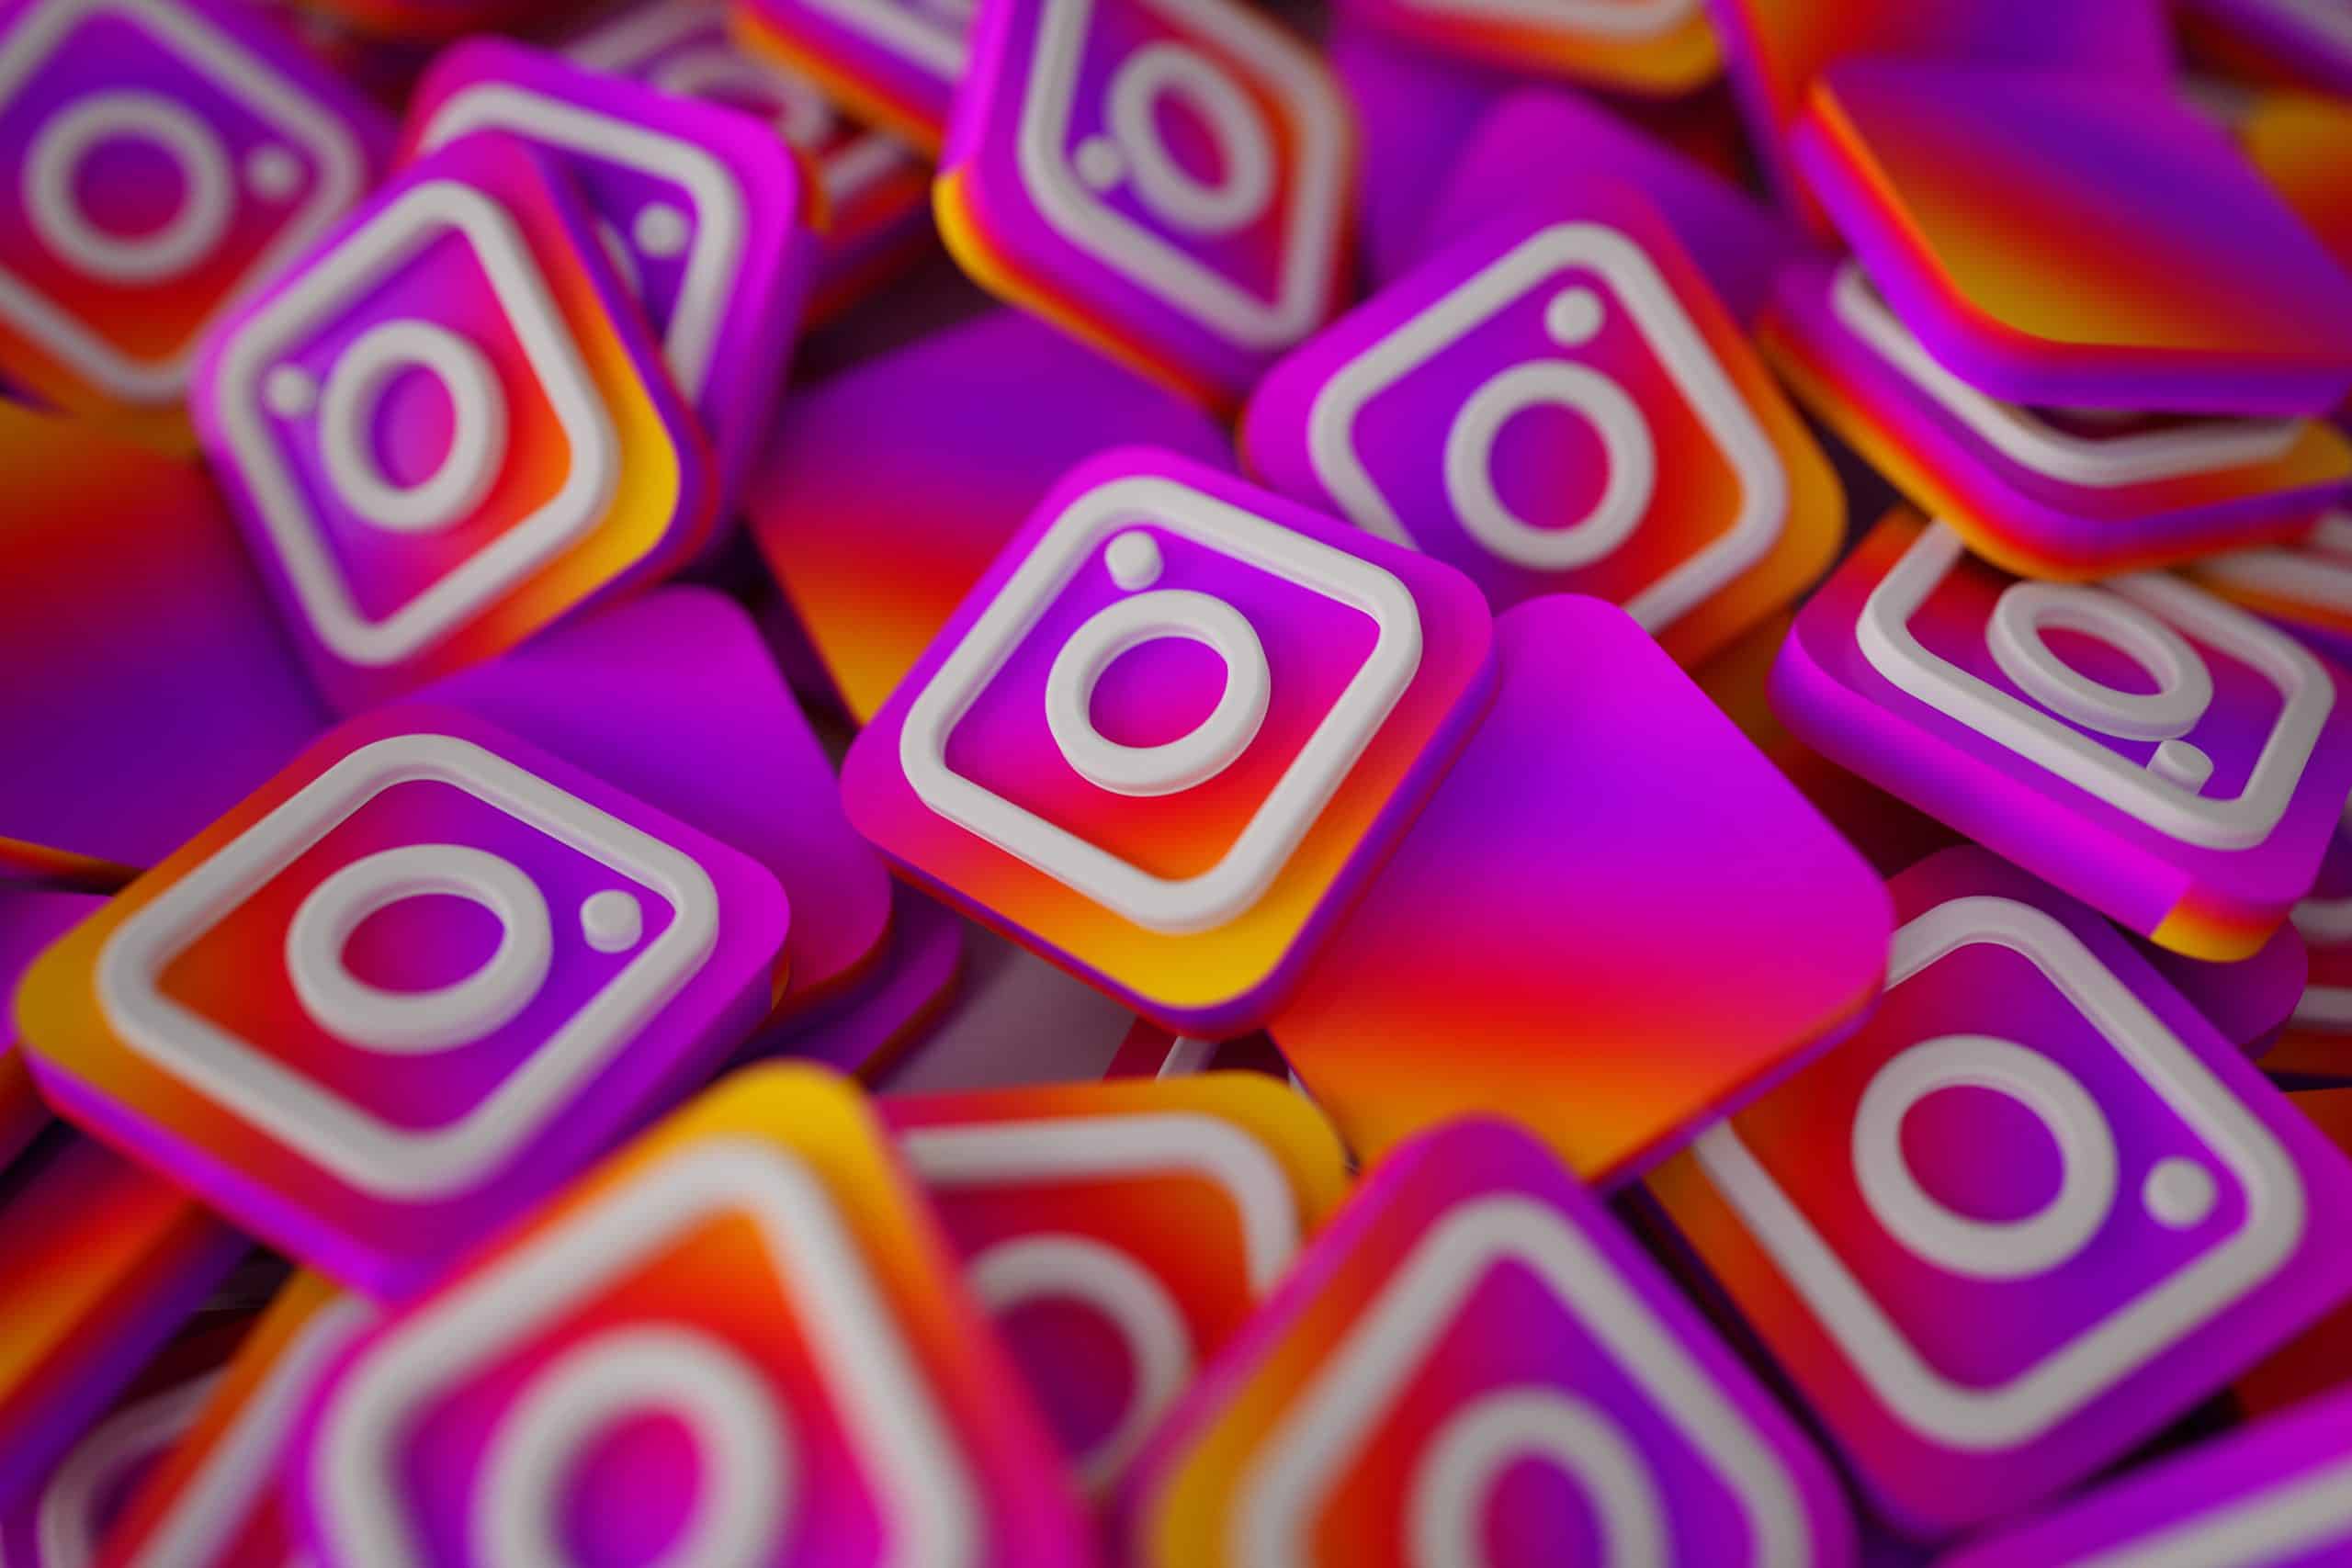 Tips to Boost Instagram Engagement